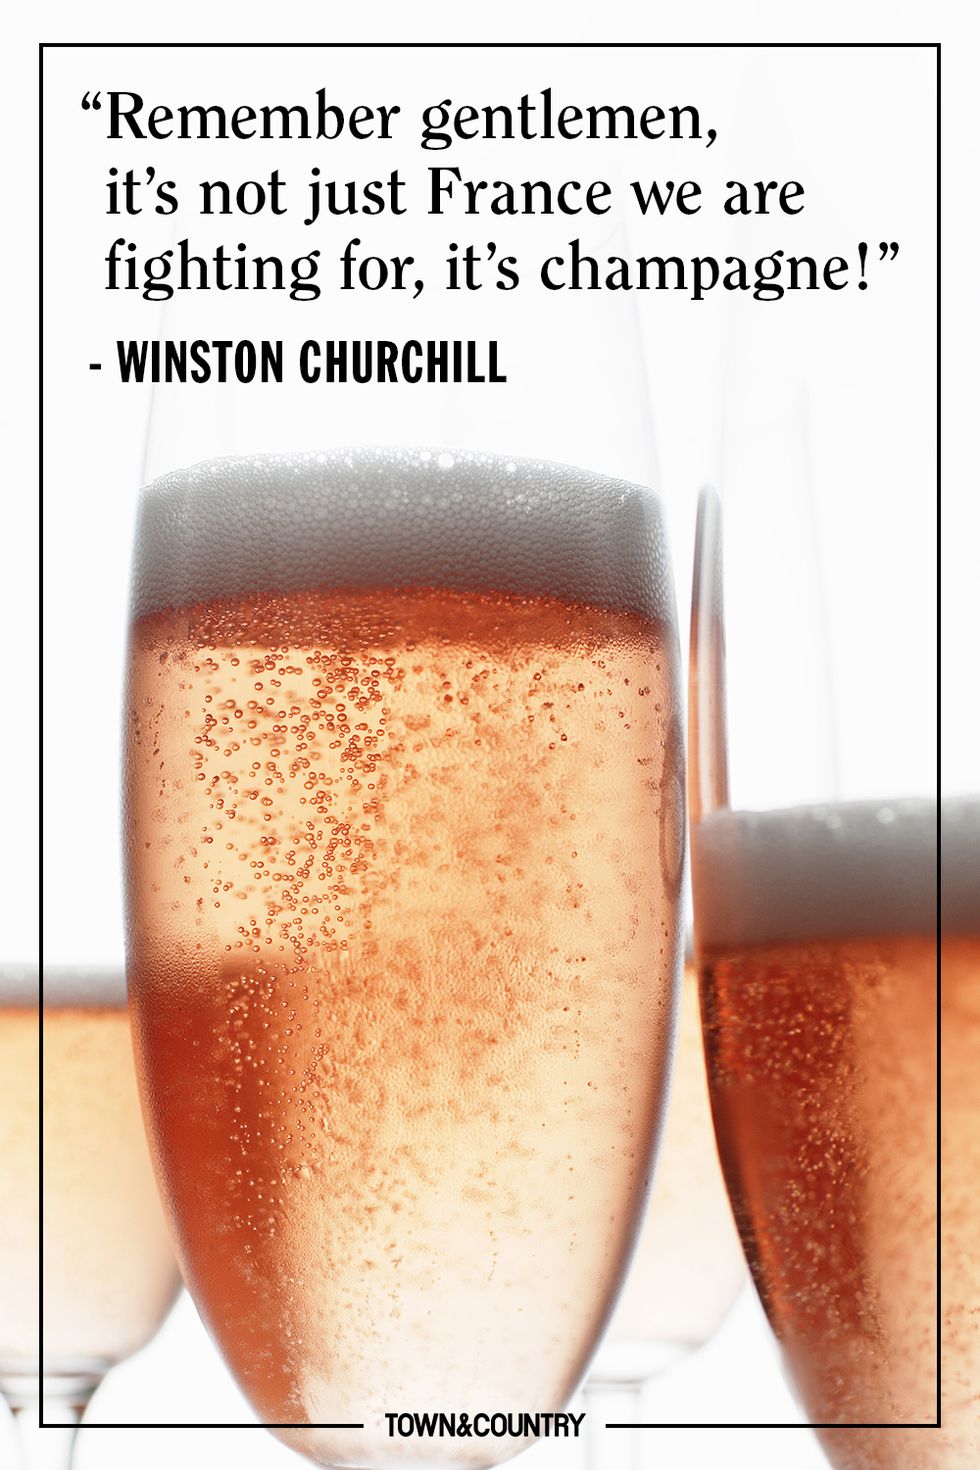 10 Best Champagne Quotes - Famous Sayings About Champagne